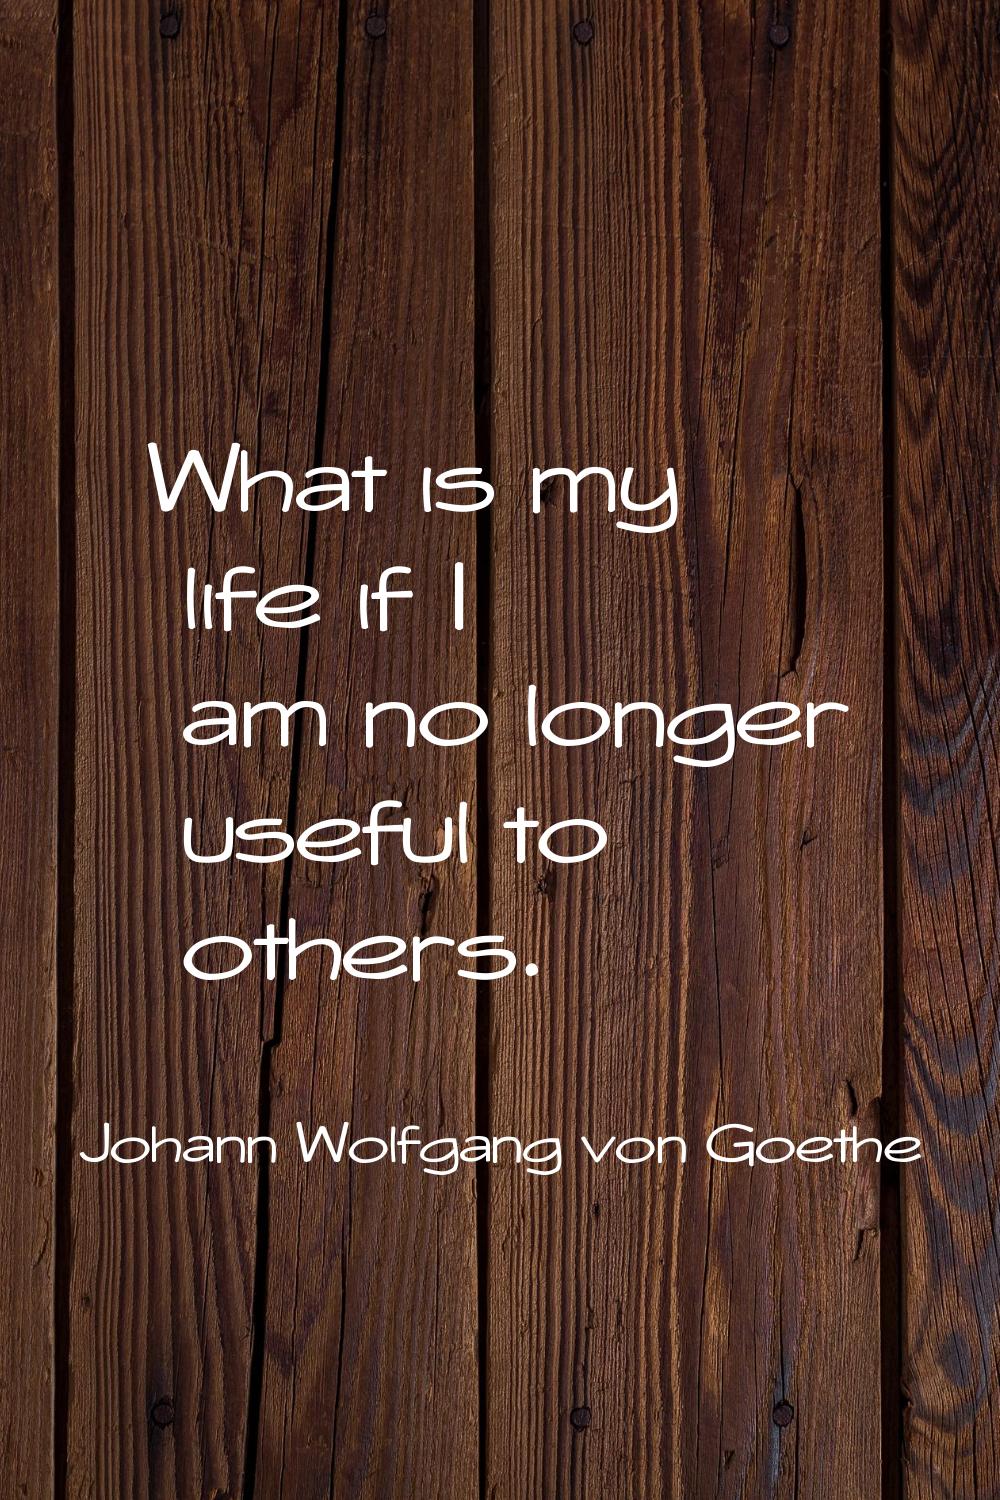 What is my life if I am no longer useful to others.